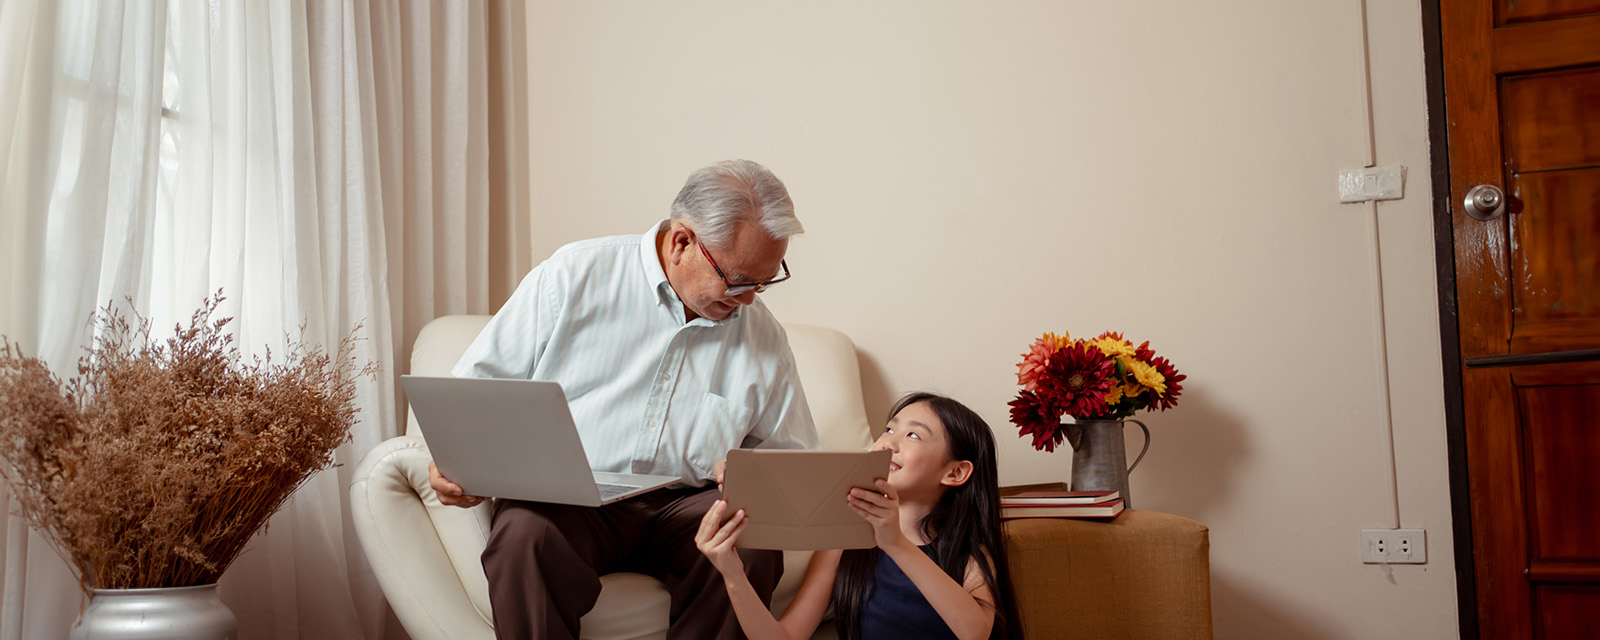 kids interacting with grandparents learning on device